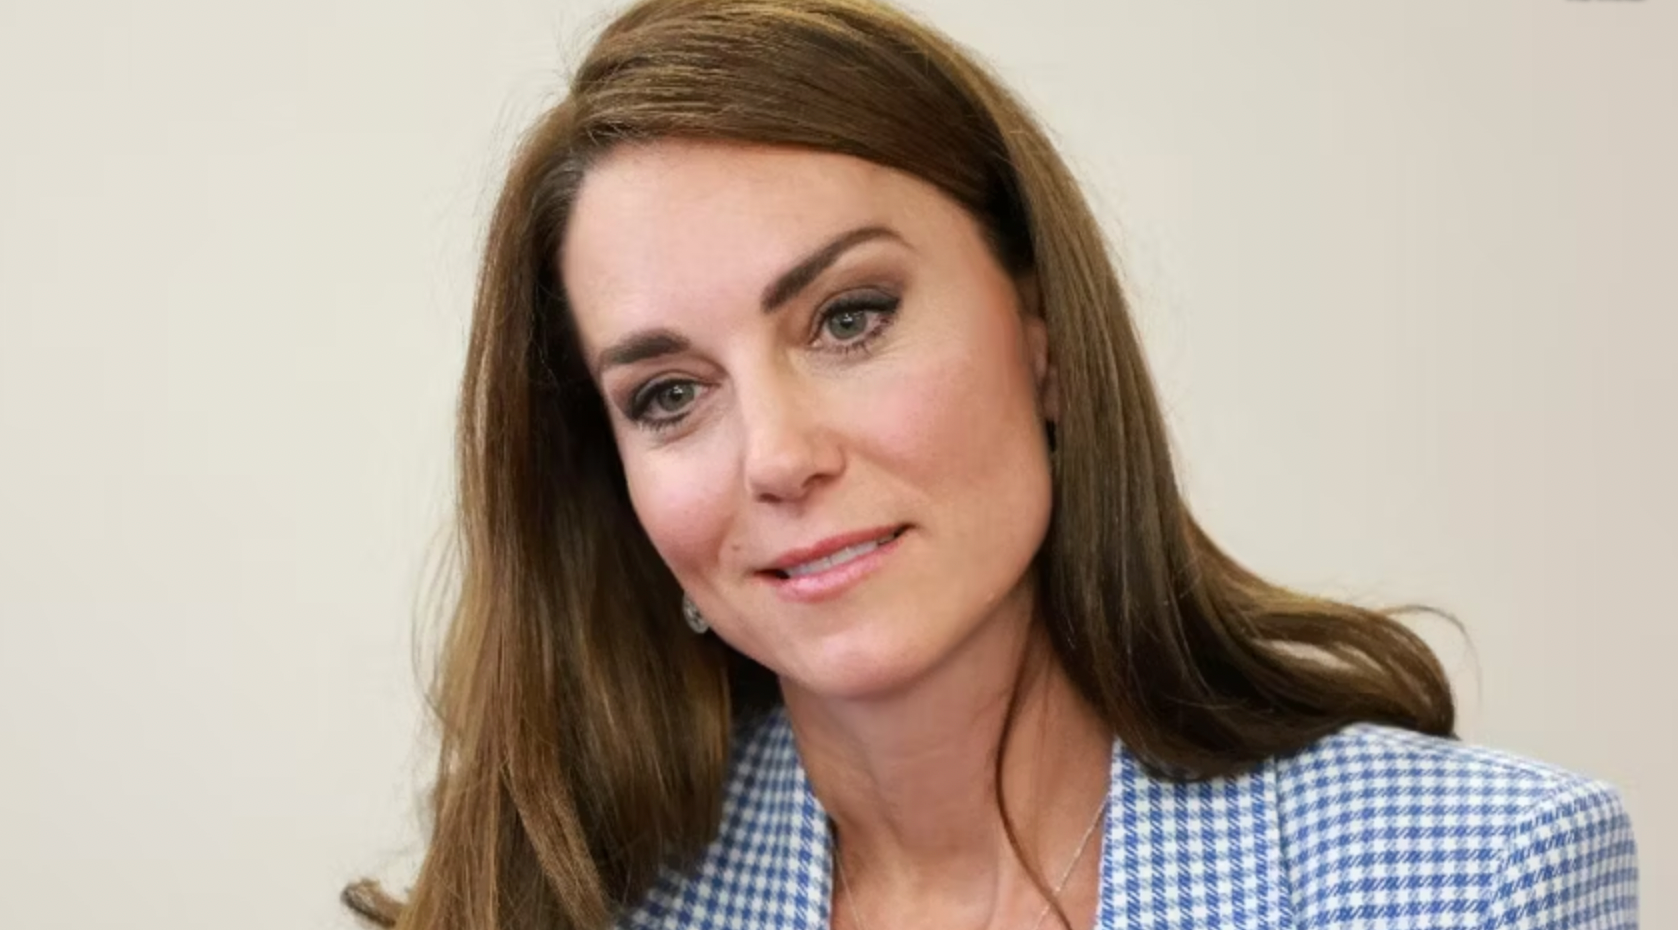 Kate Middleton Admitted She Was "So Isolated" In A Rental That Cost Less Than $930 Per Month During Her First Year Of Motherhood